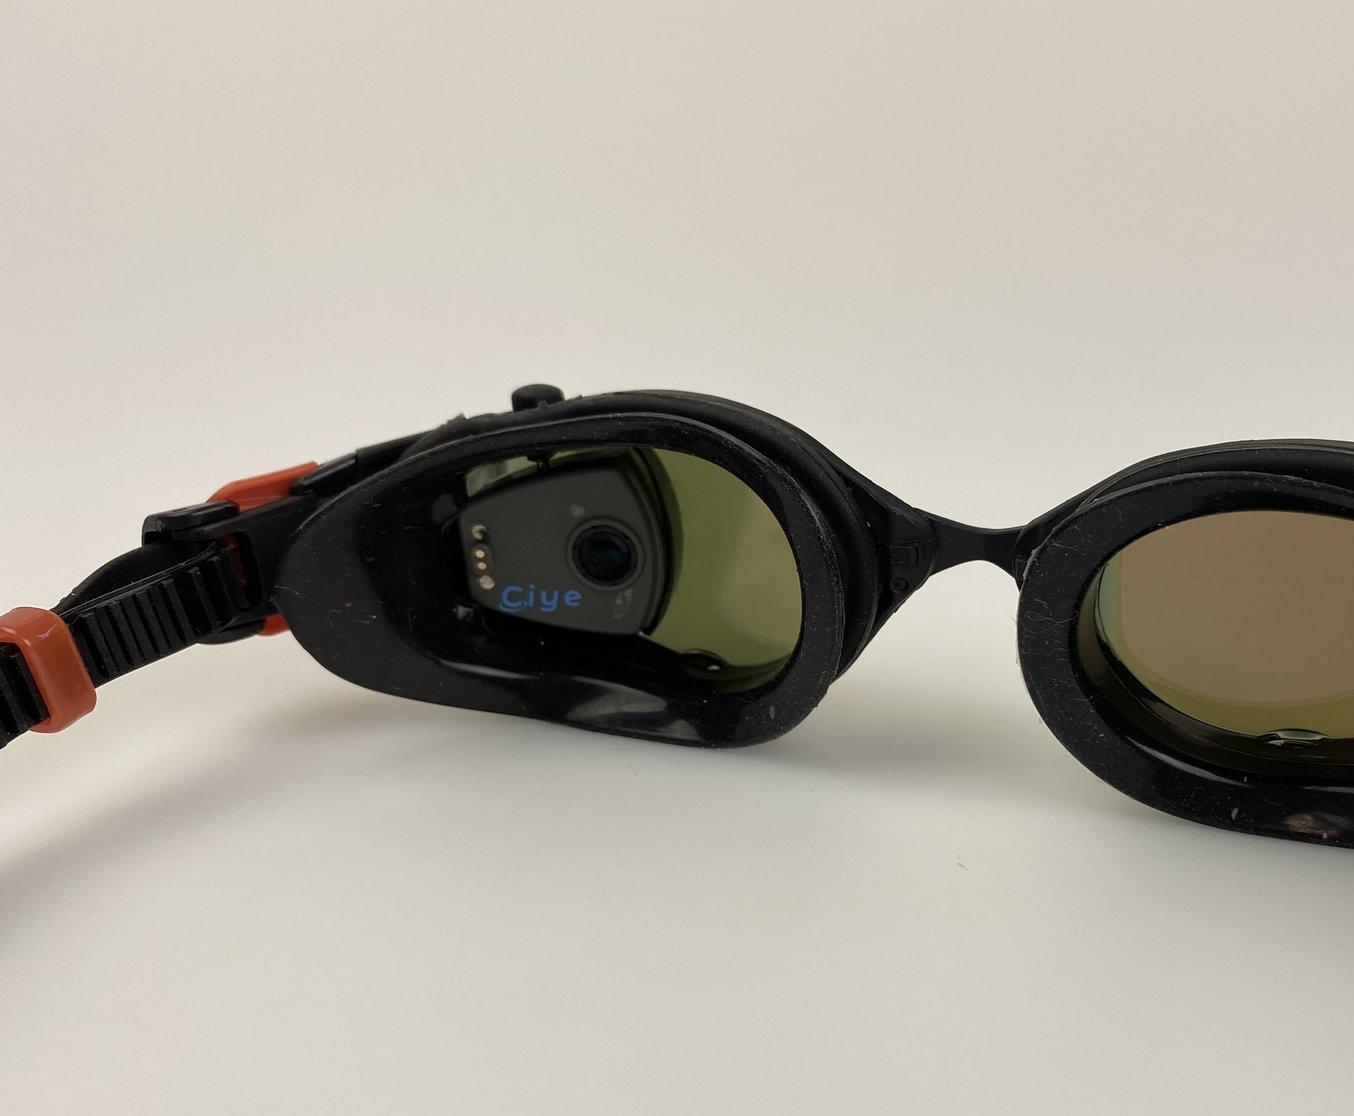 Prototype of the new Smart Goggle Max.